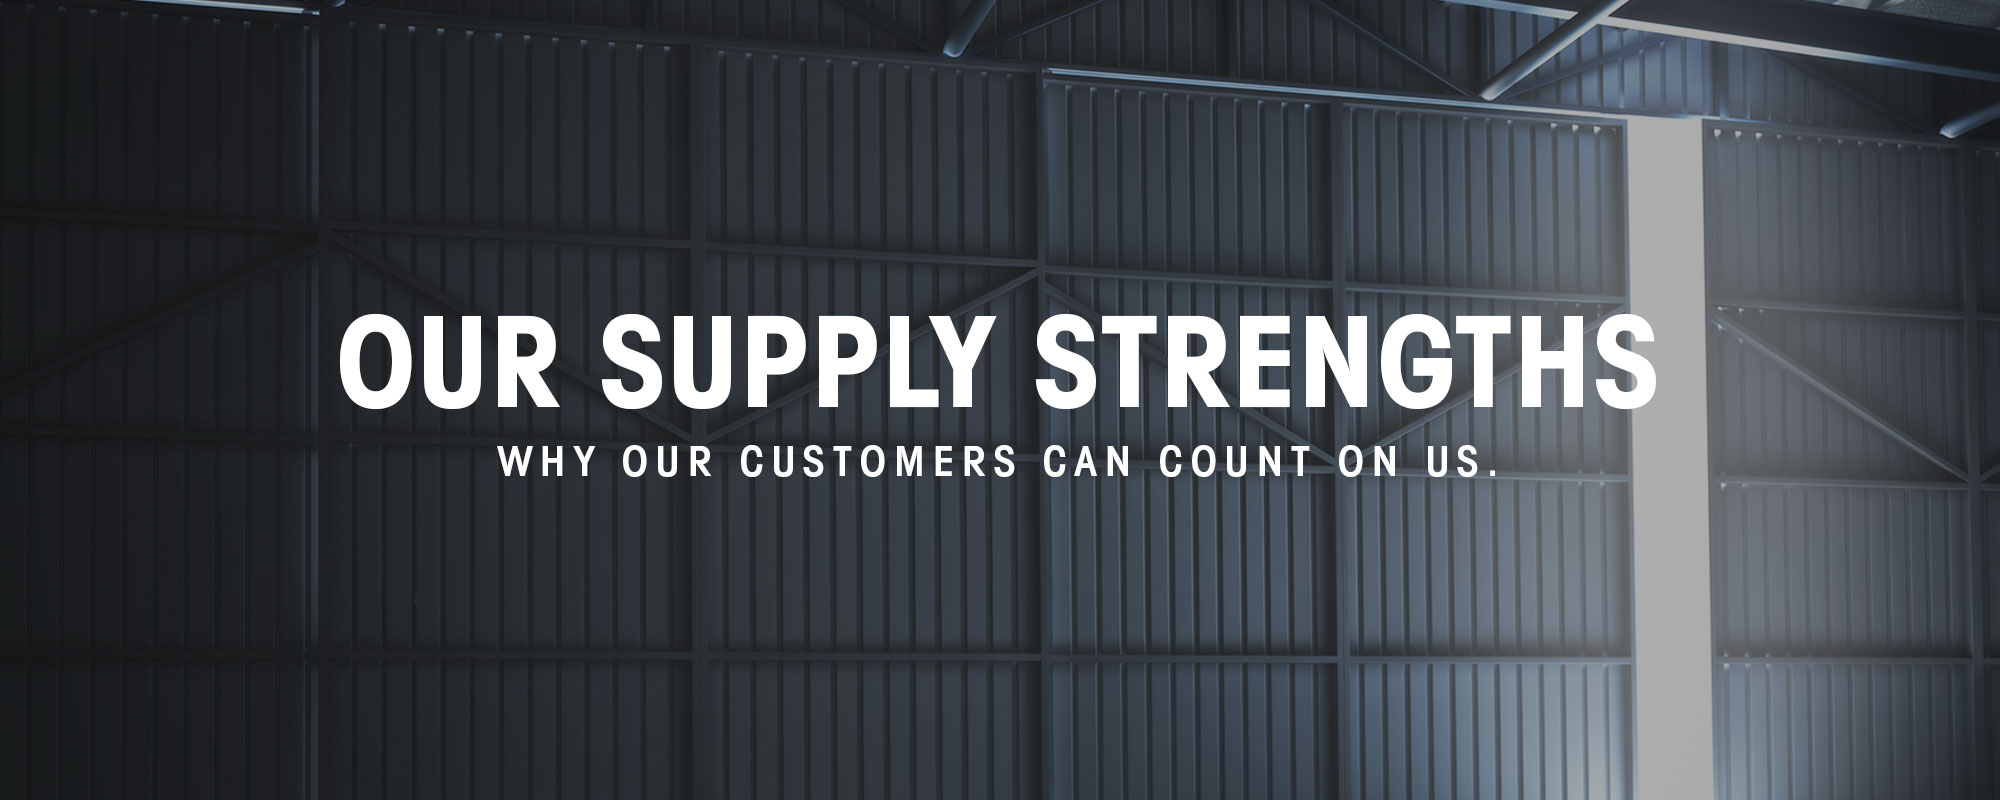 Our Supply Strengths, why our customers can count on us